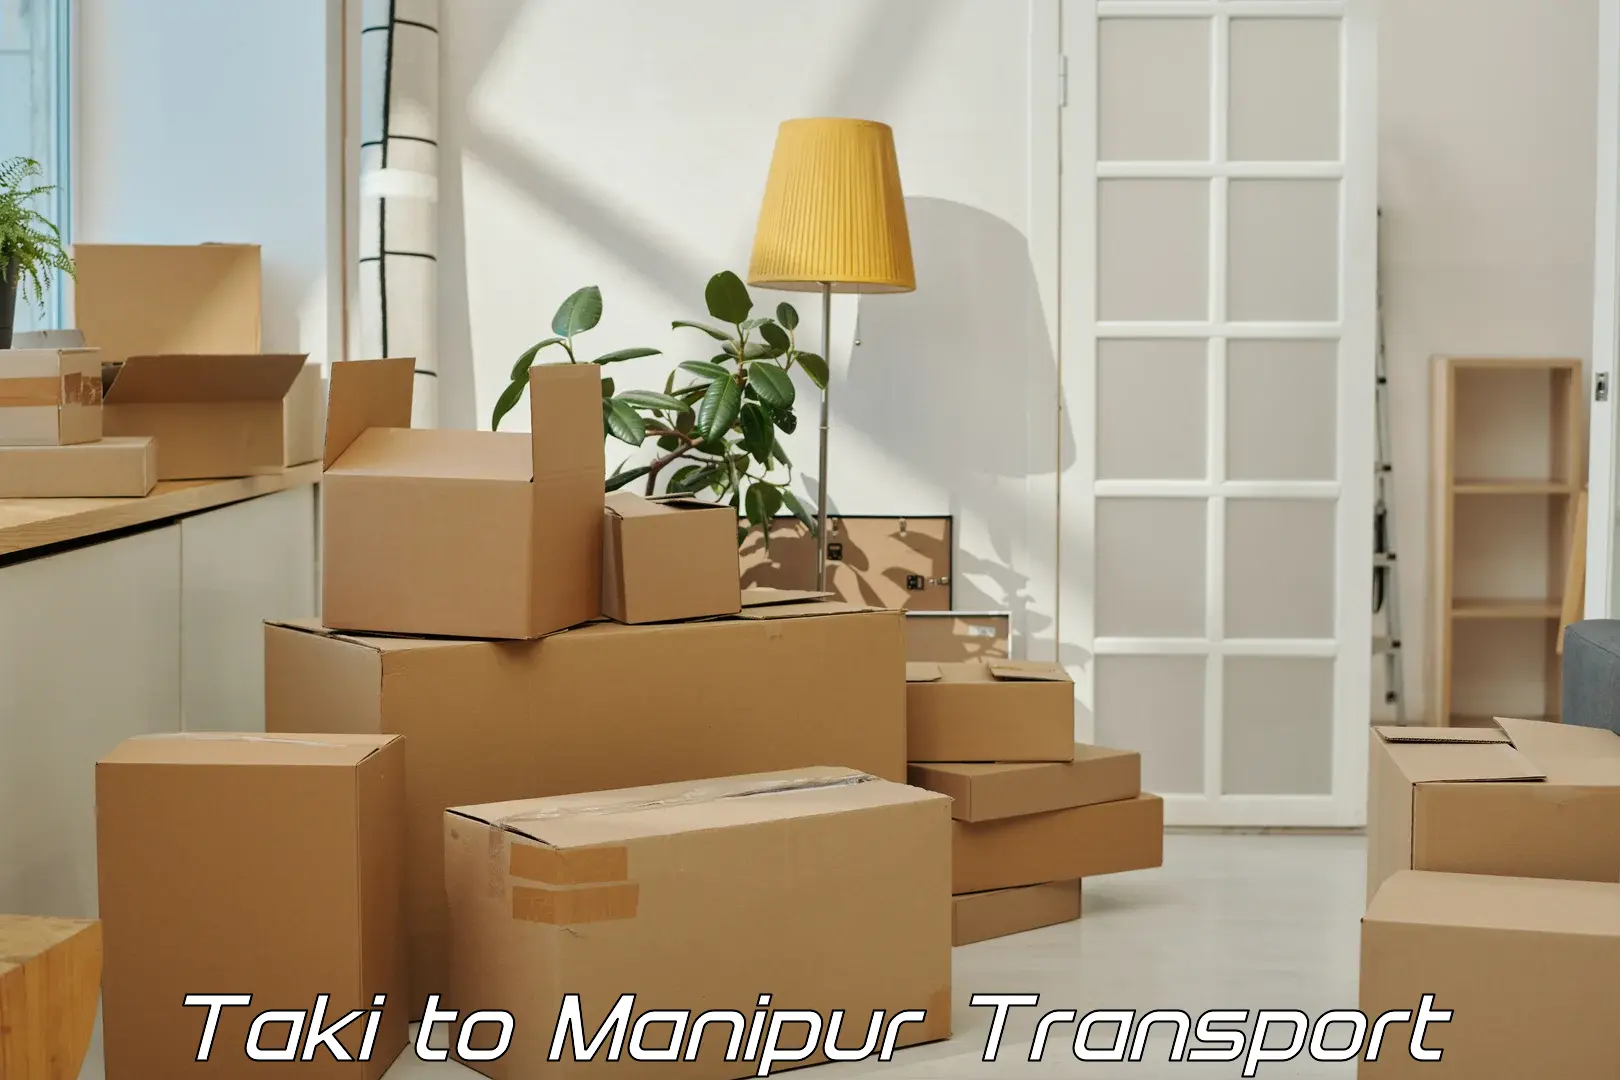 Truck transport companies in India Taki to Manipur